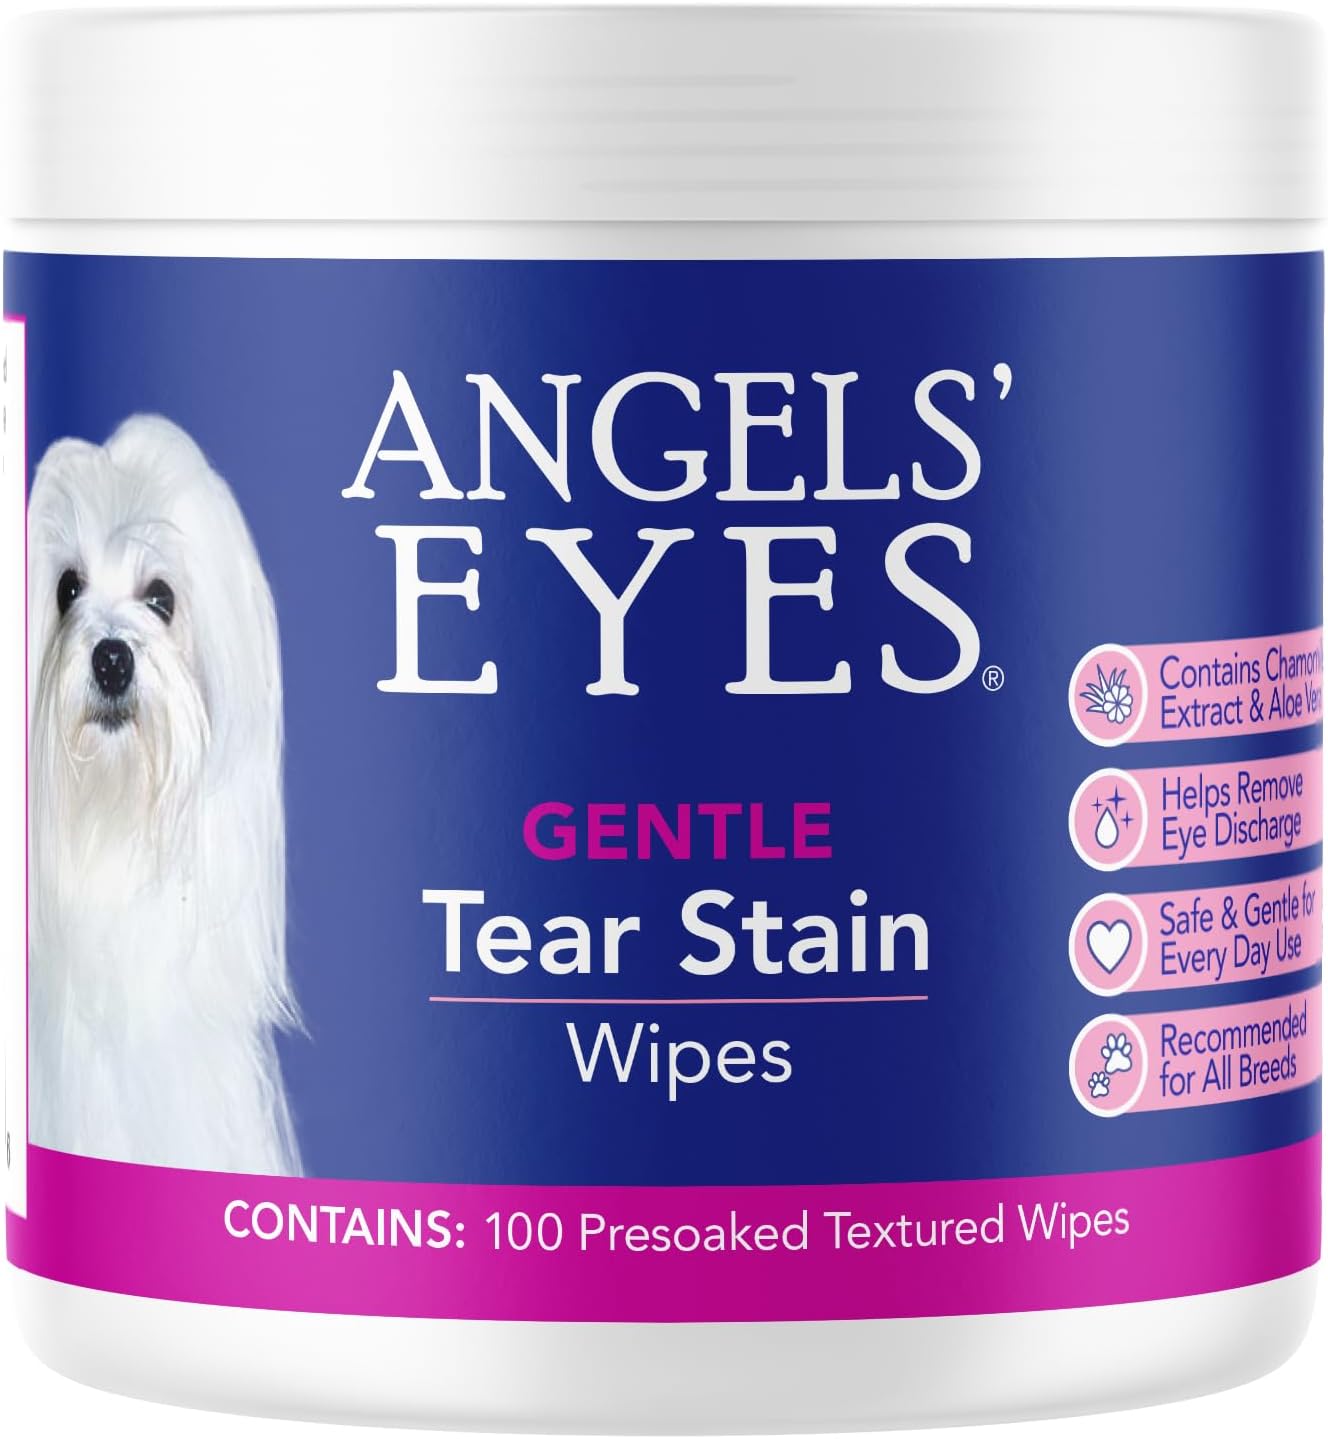 ANGELS' EYES Gentle Tear Stain Wipes for Dogs and Cats | 100 ct Presoaked & Textured Eye & Face Wipes | Remove Discharge & Mucus Secretions